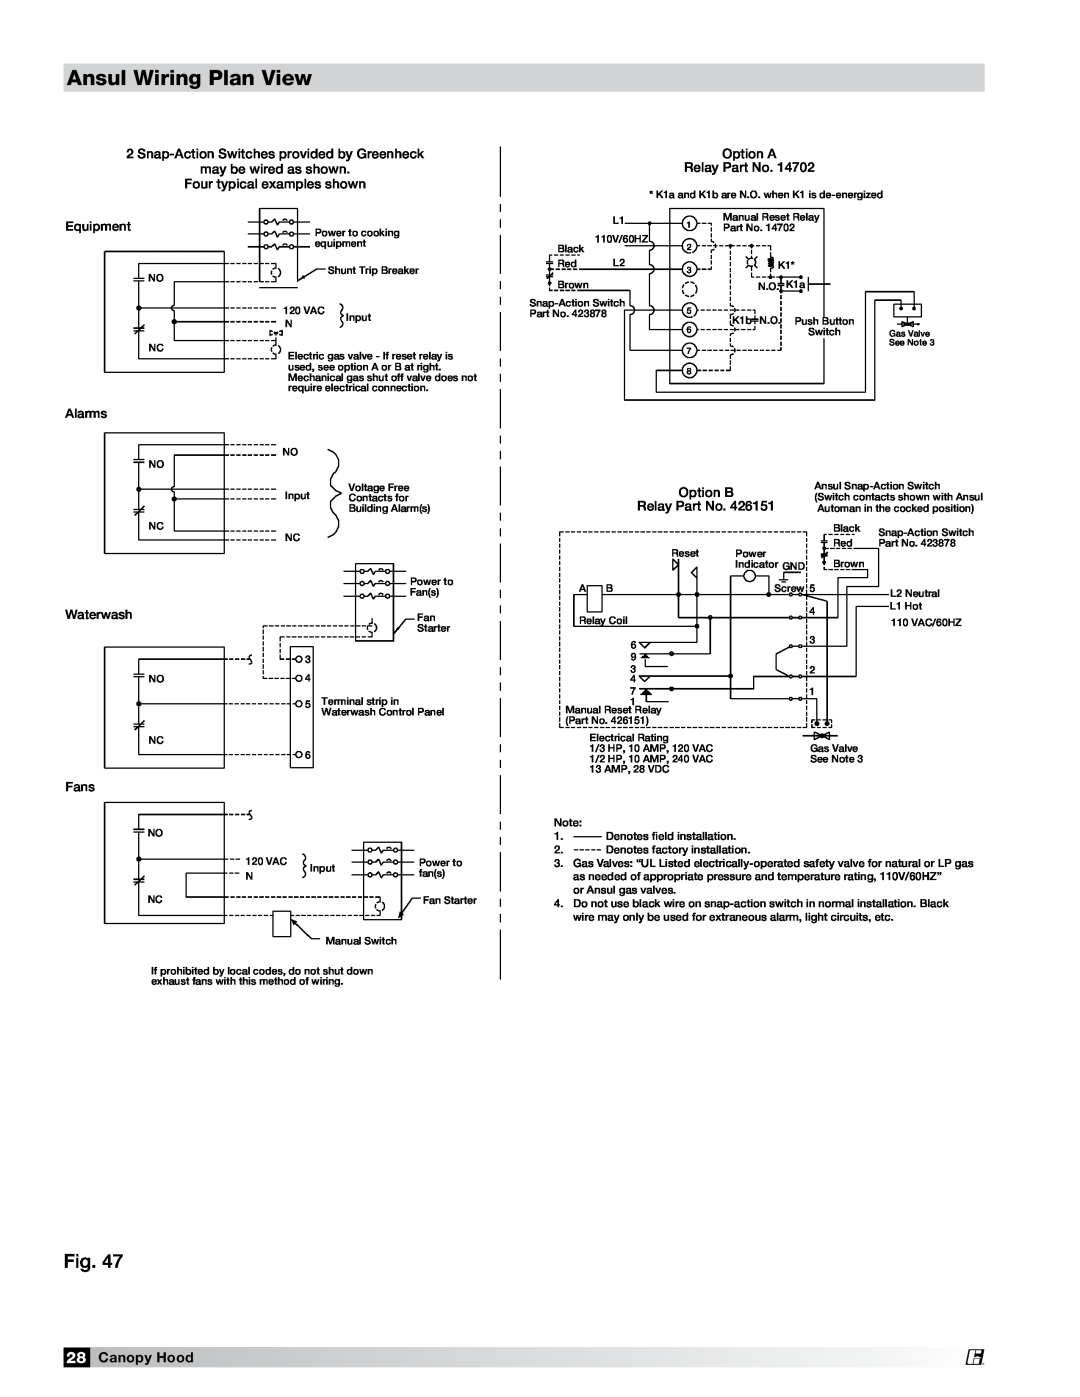 Greenheck Fan 452413 Ansul Wiring Plan View, Canopy Hood, Snap-ActionSwitches provided by Greenheck, Equipment, Alarms 